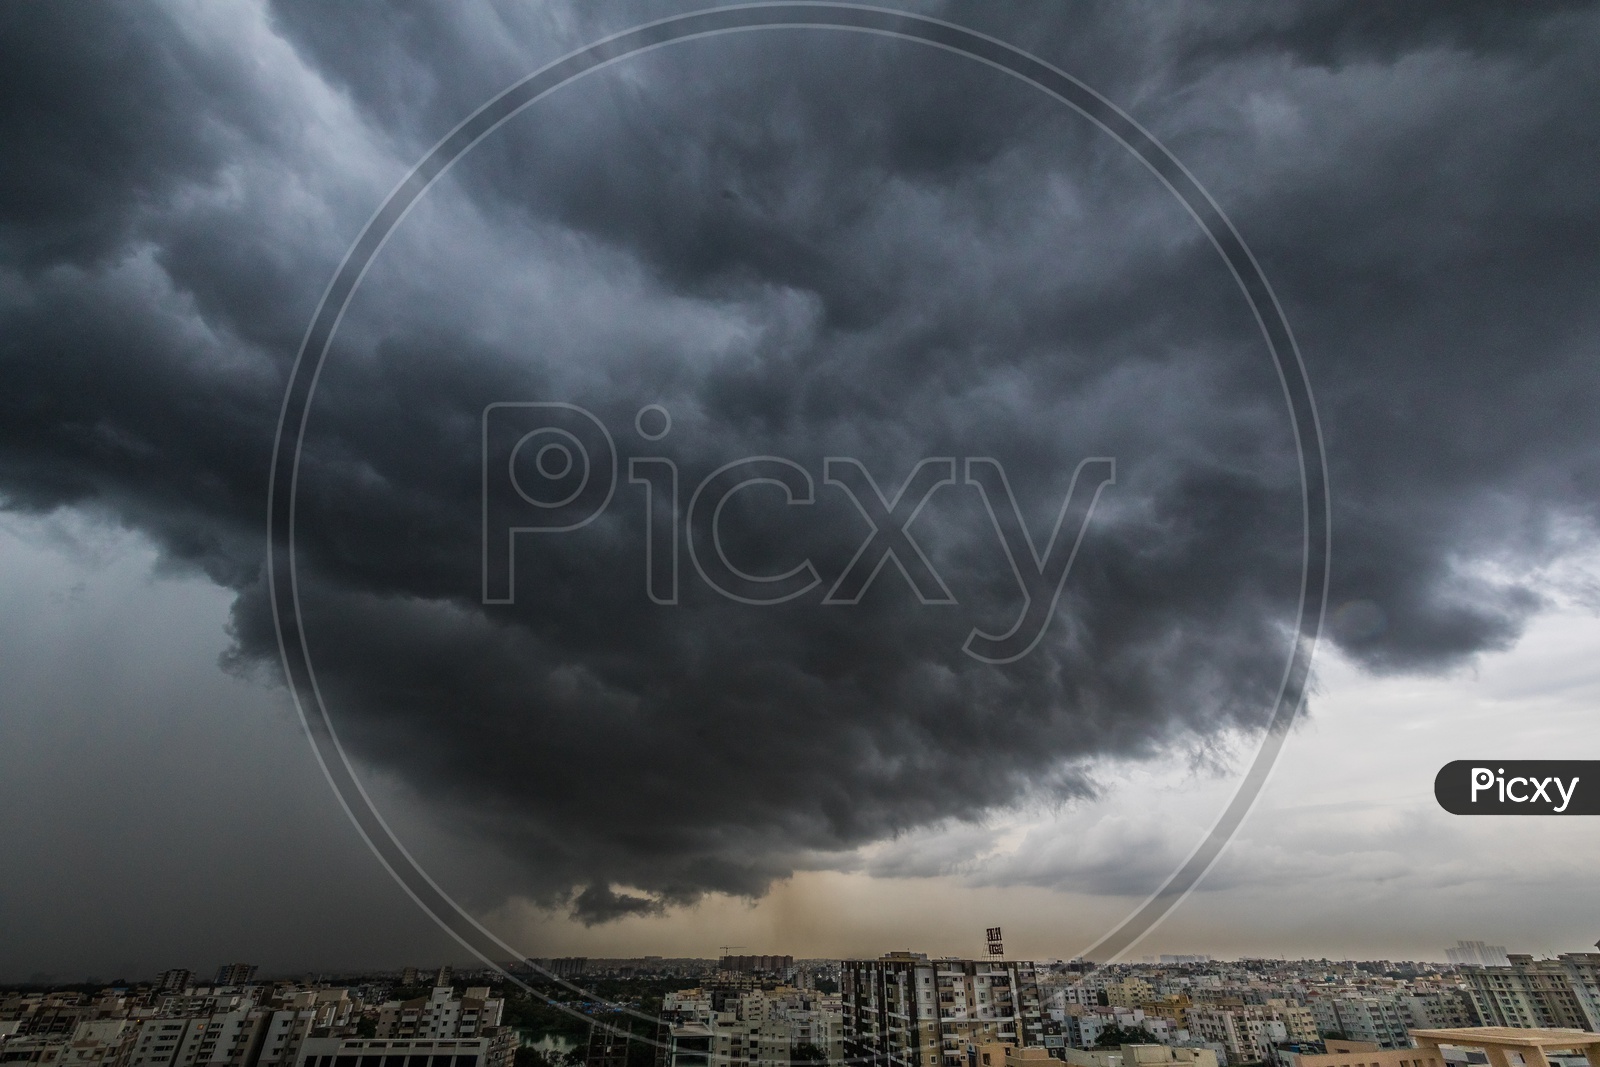 City Scape With High Rise Buildings On a Cloudy Day With Dark Black Clouds